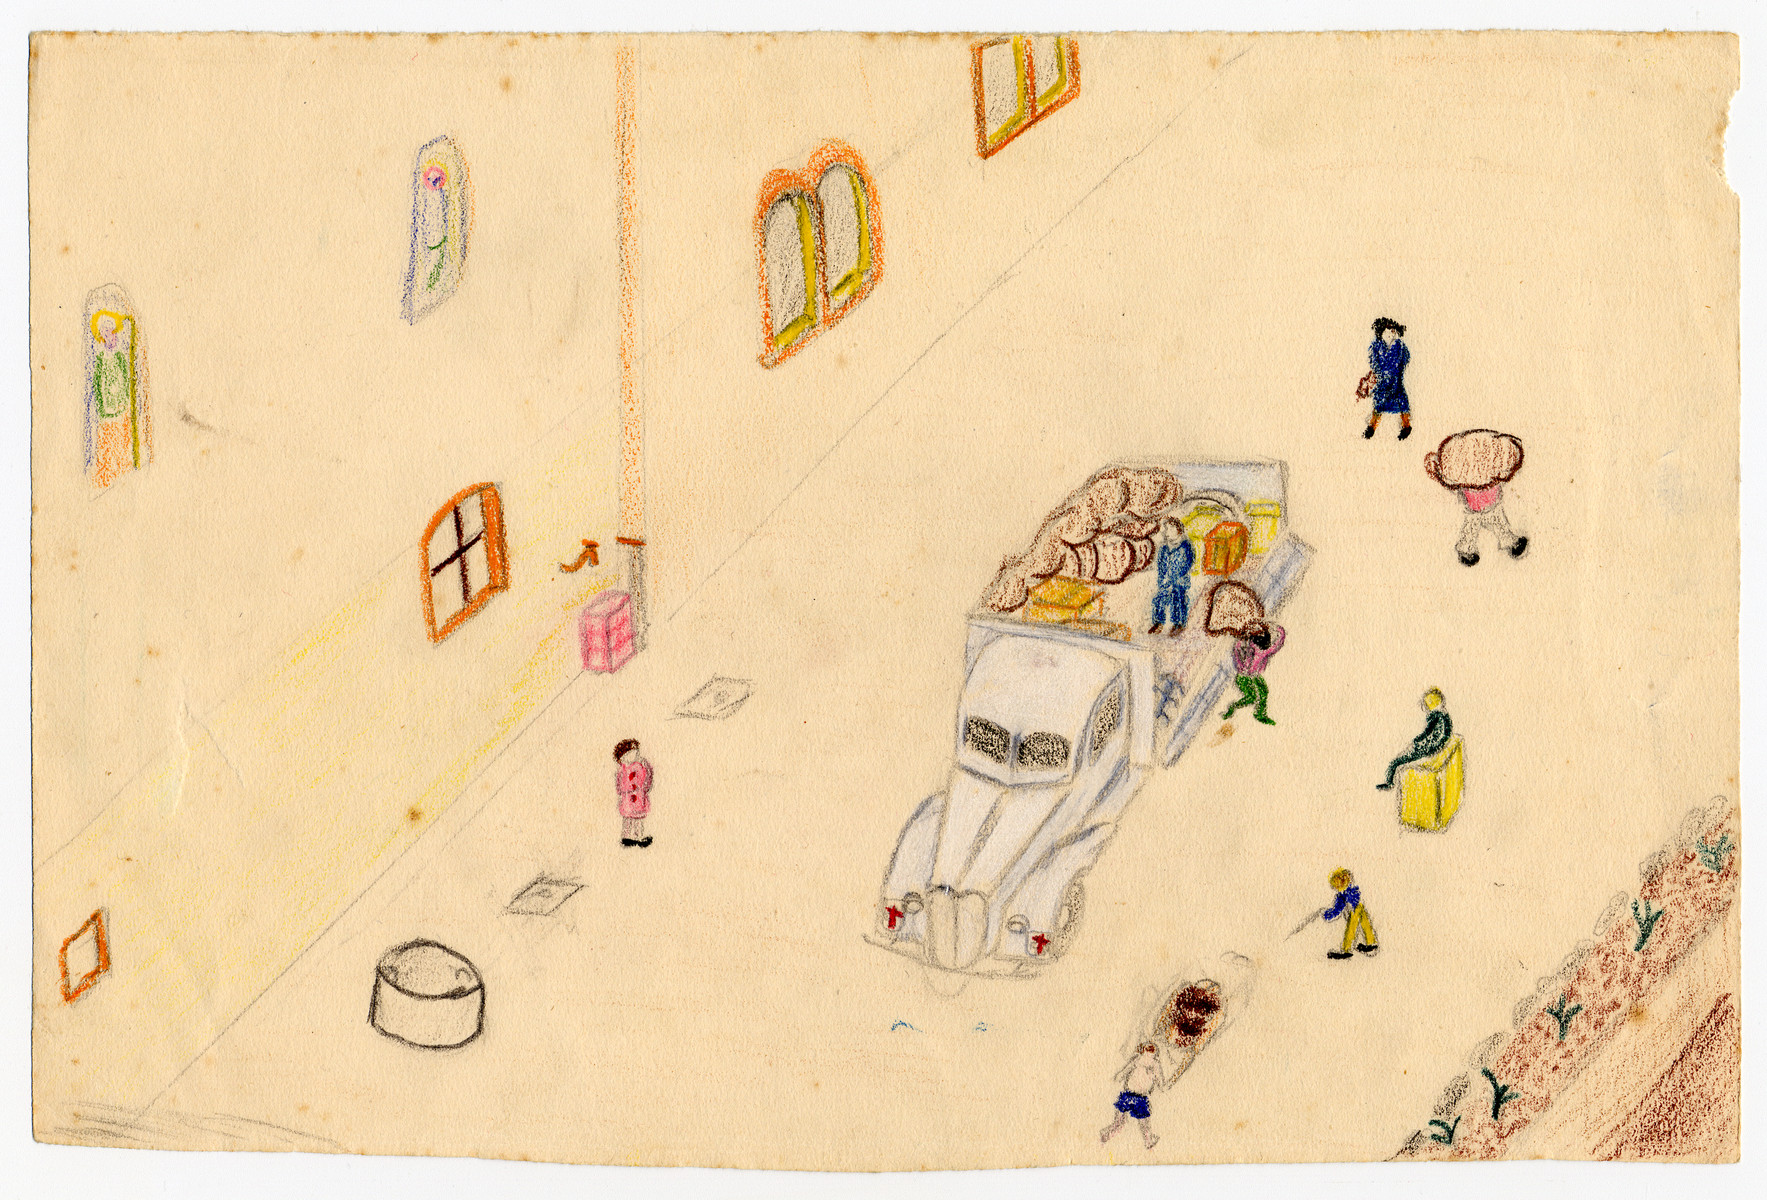 Color child's drawing of a truck delivering food supplies created by a child in Chateau de la Hille.